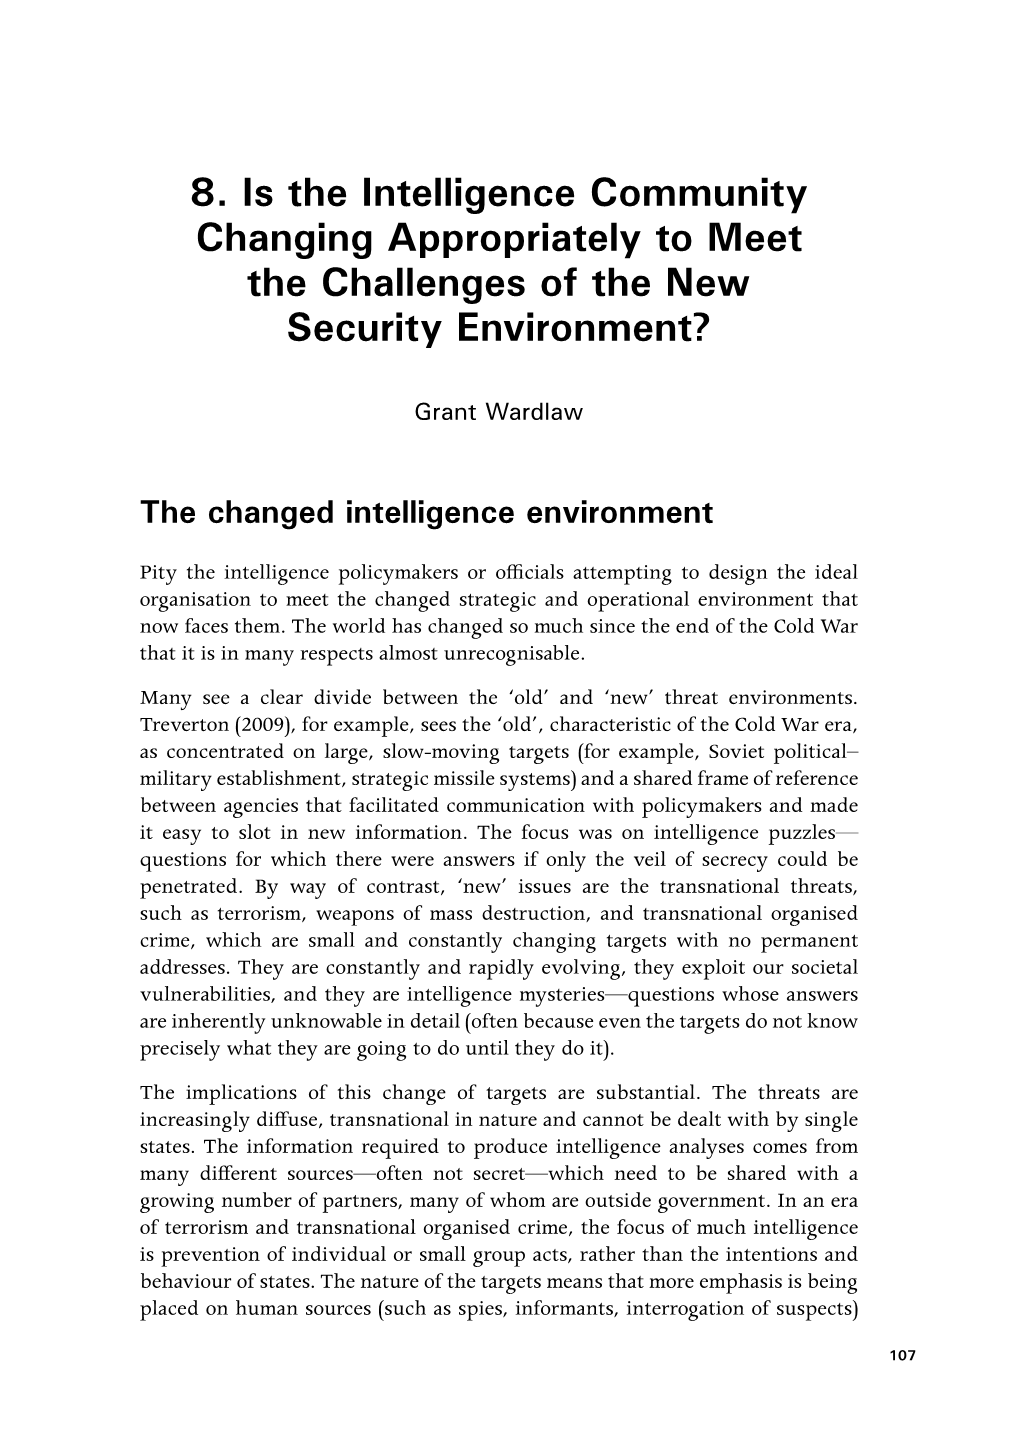 8. Is the Intelligence Community Changing Appropriately to Meet the Challenges of the New Security Environment?